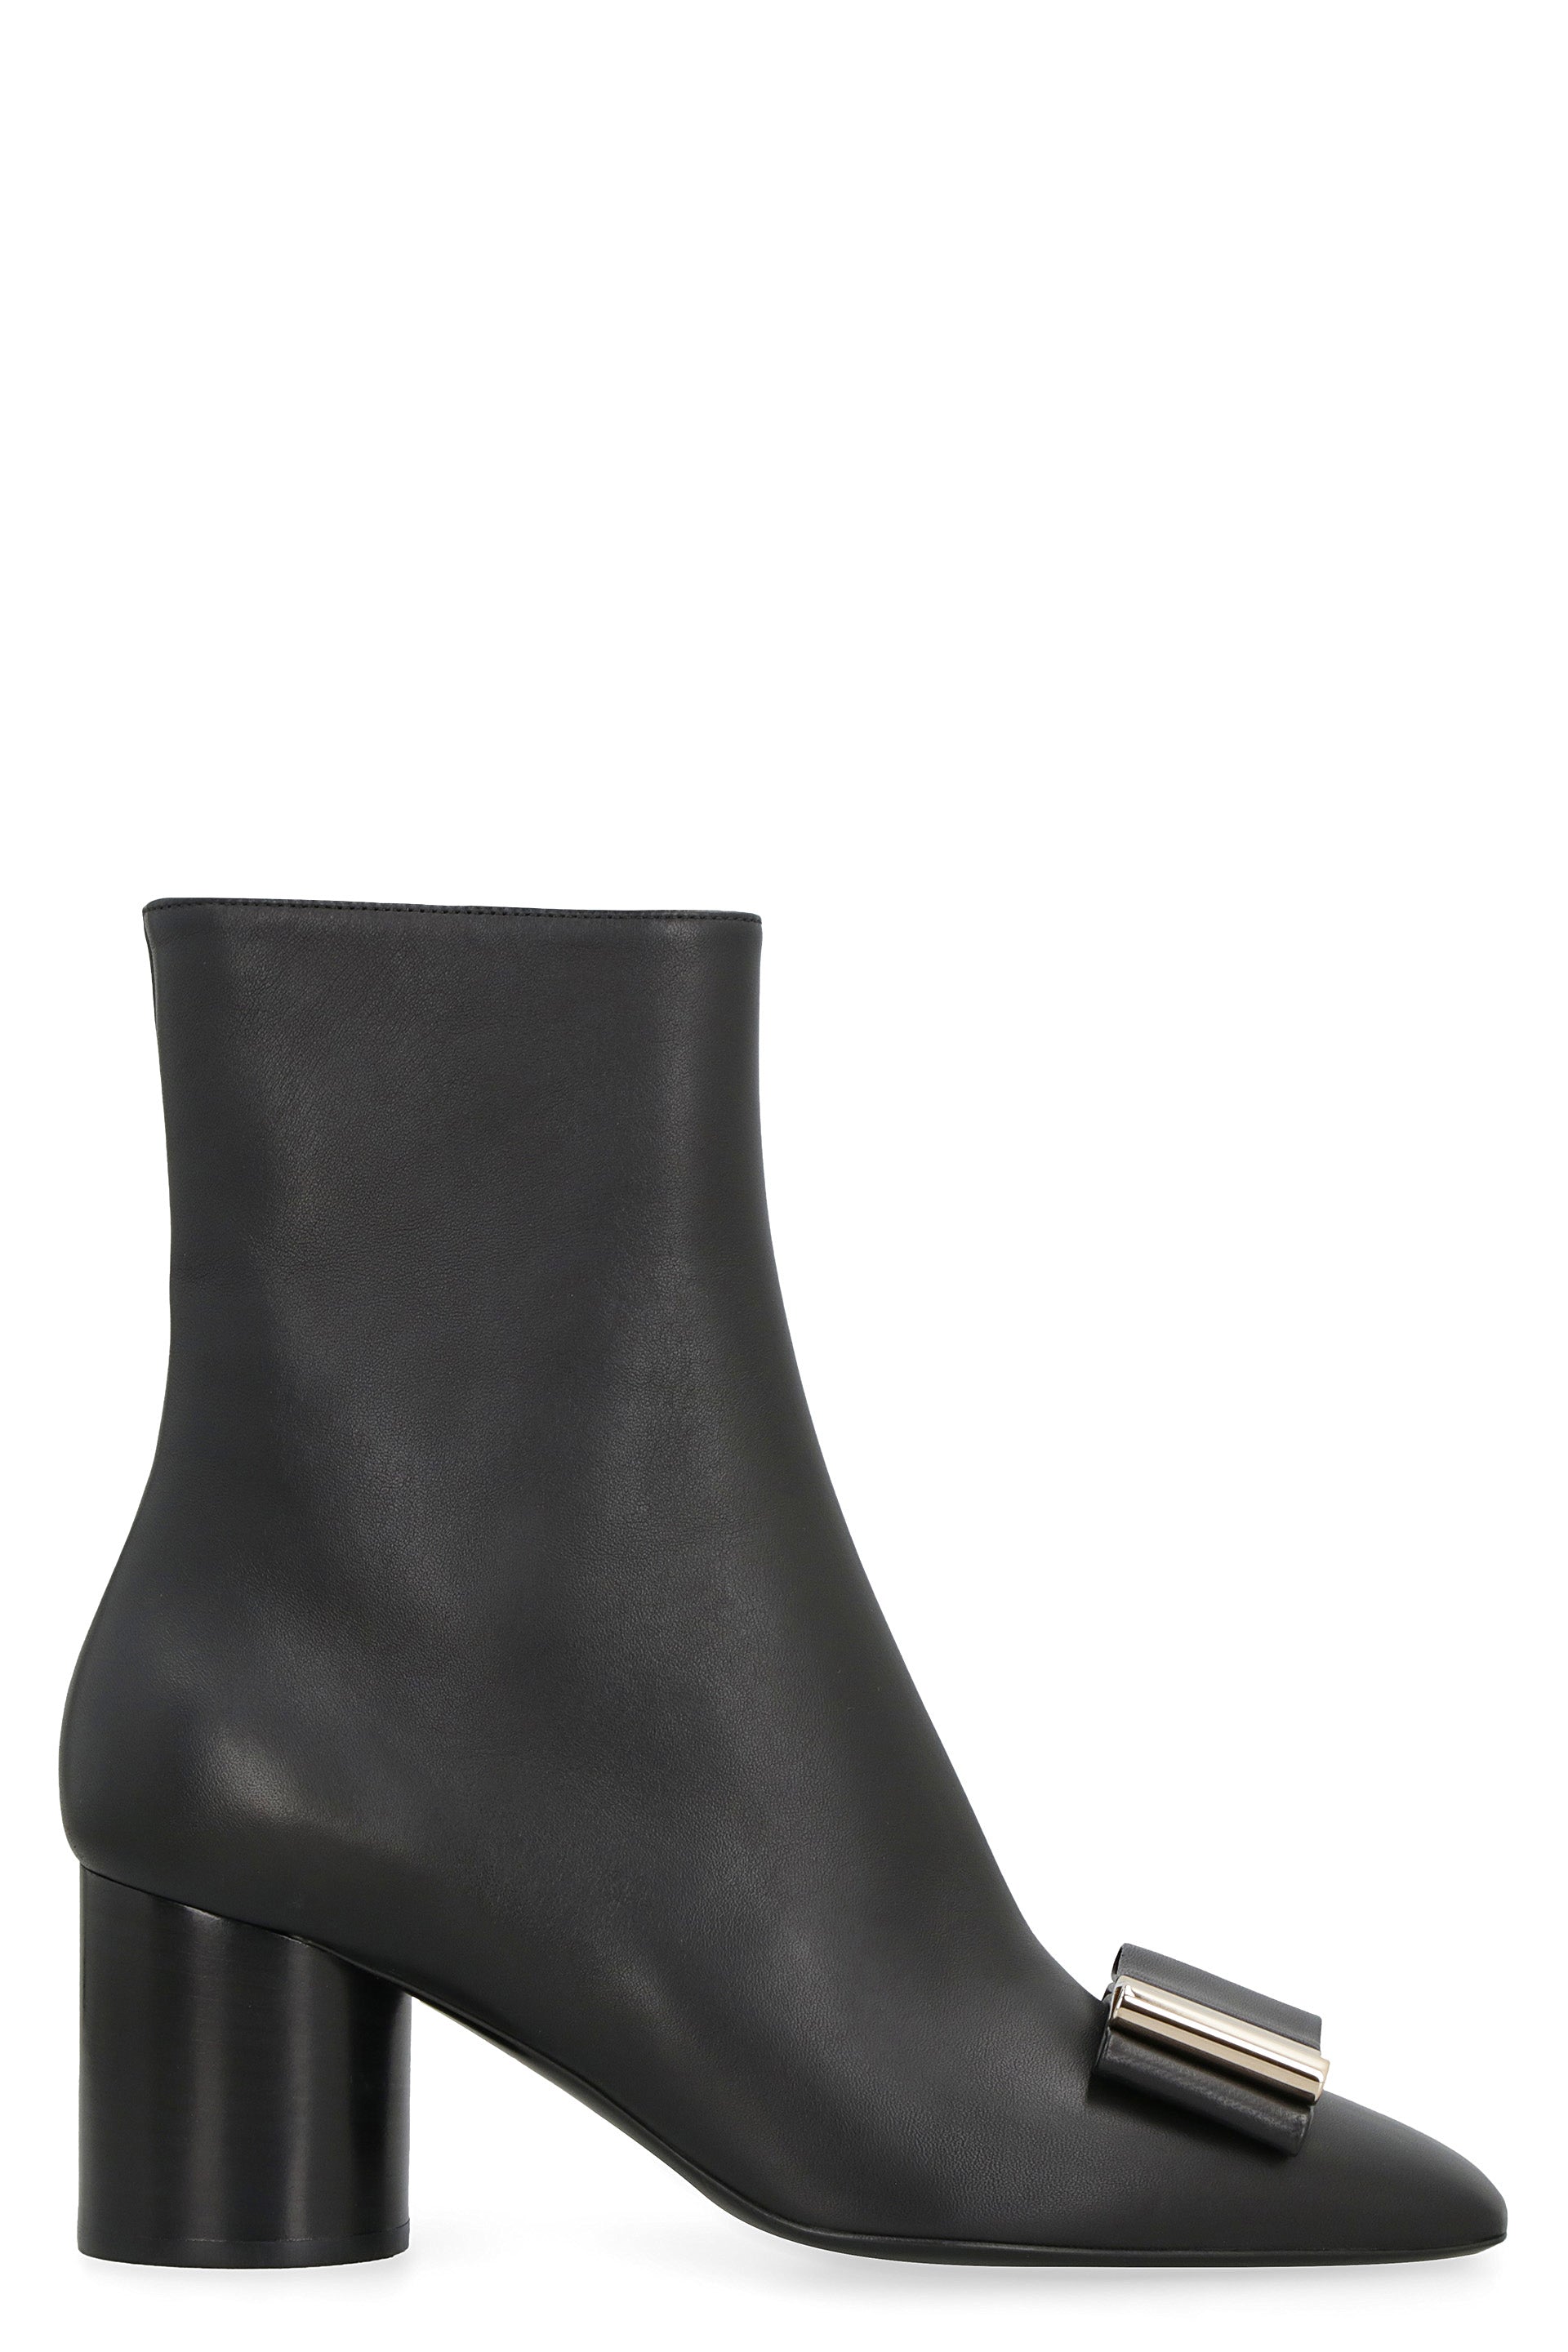 Ferragamo Black Leather Ankle Boots With Vara Front Bow For Women